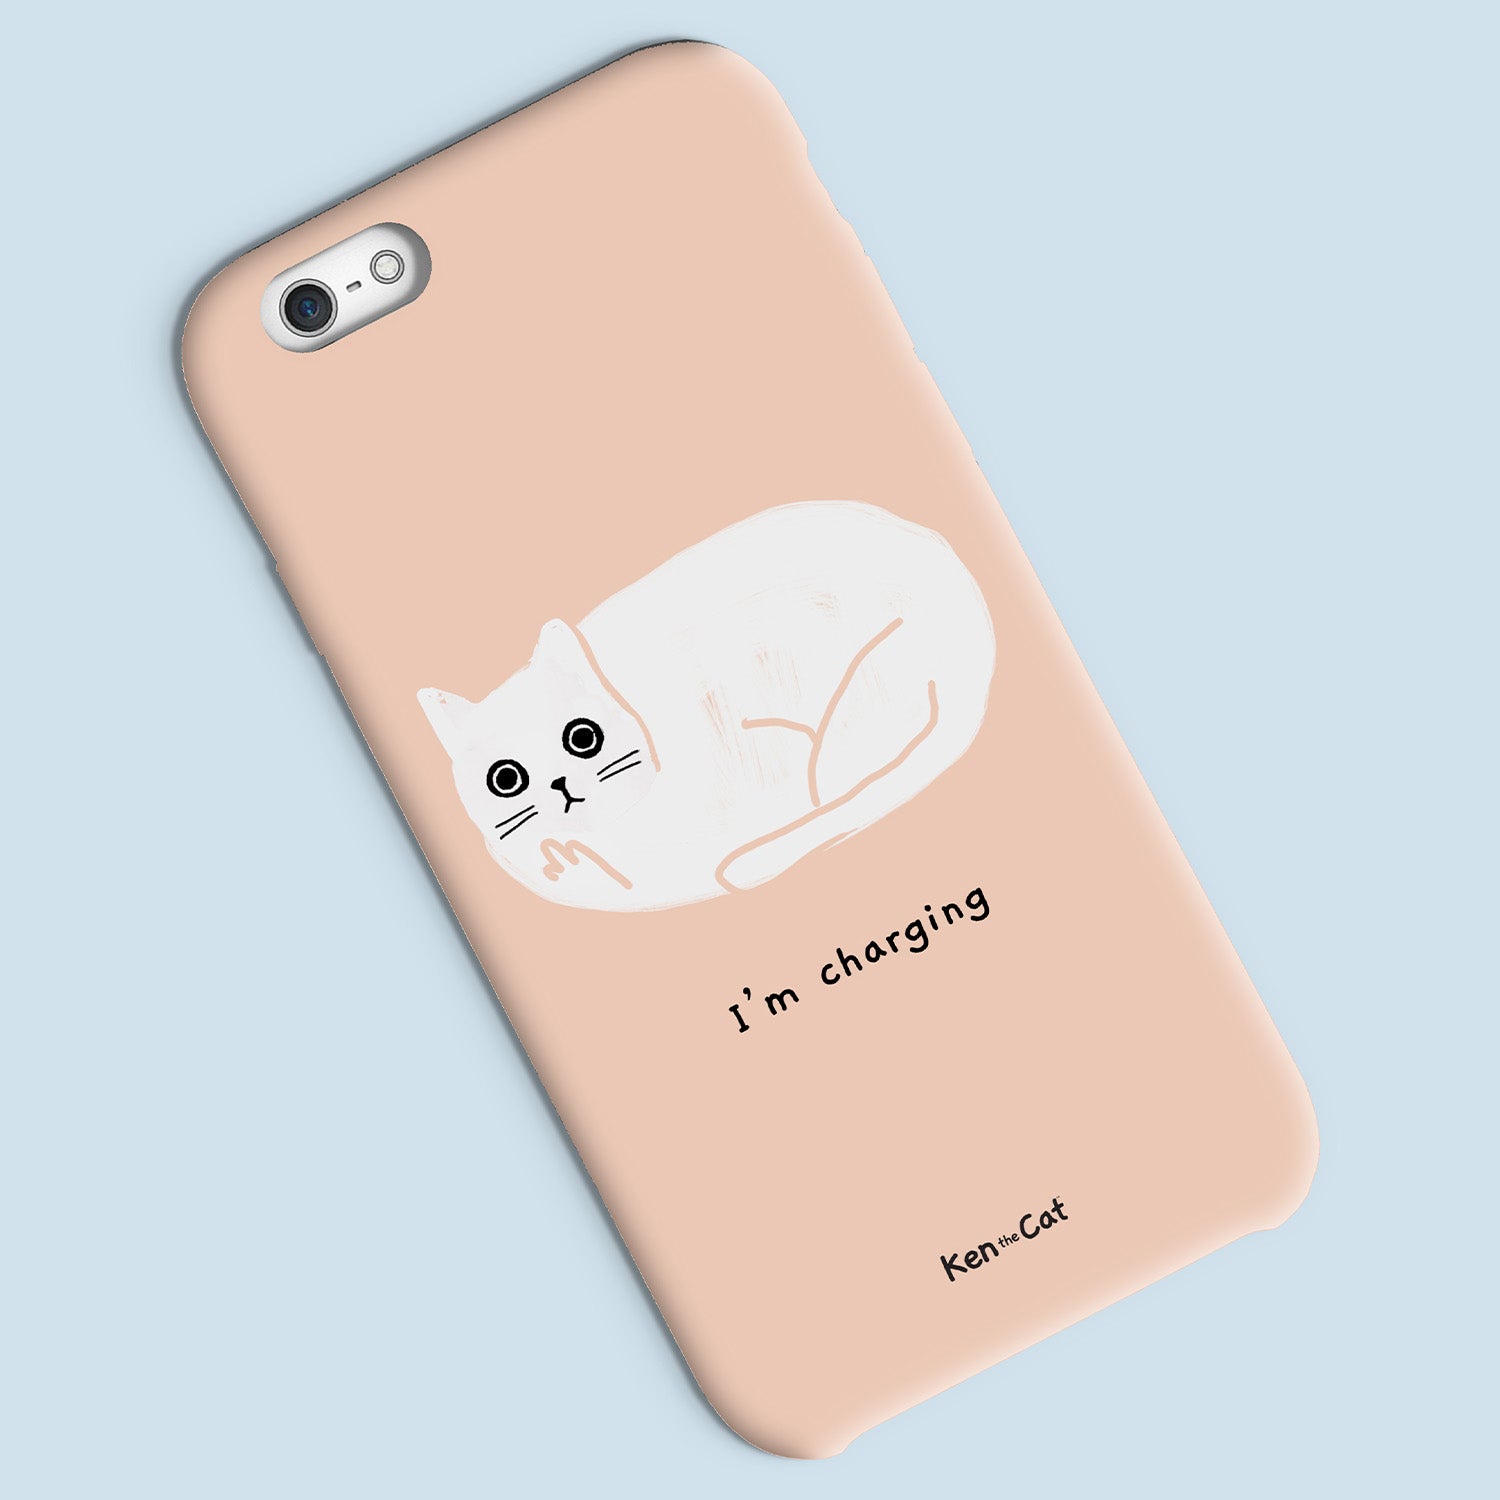 I'm Charging - Coral Phone Case